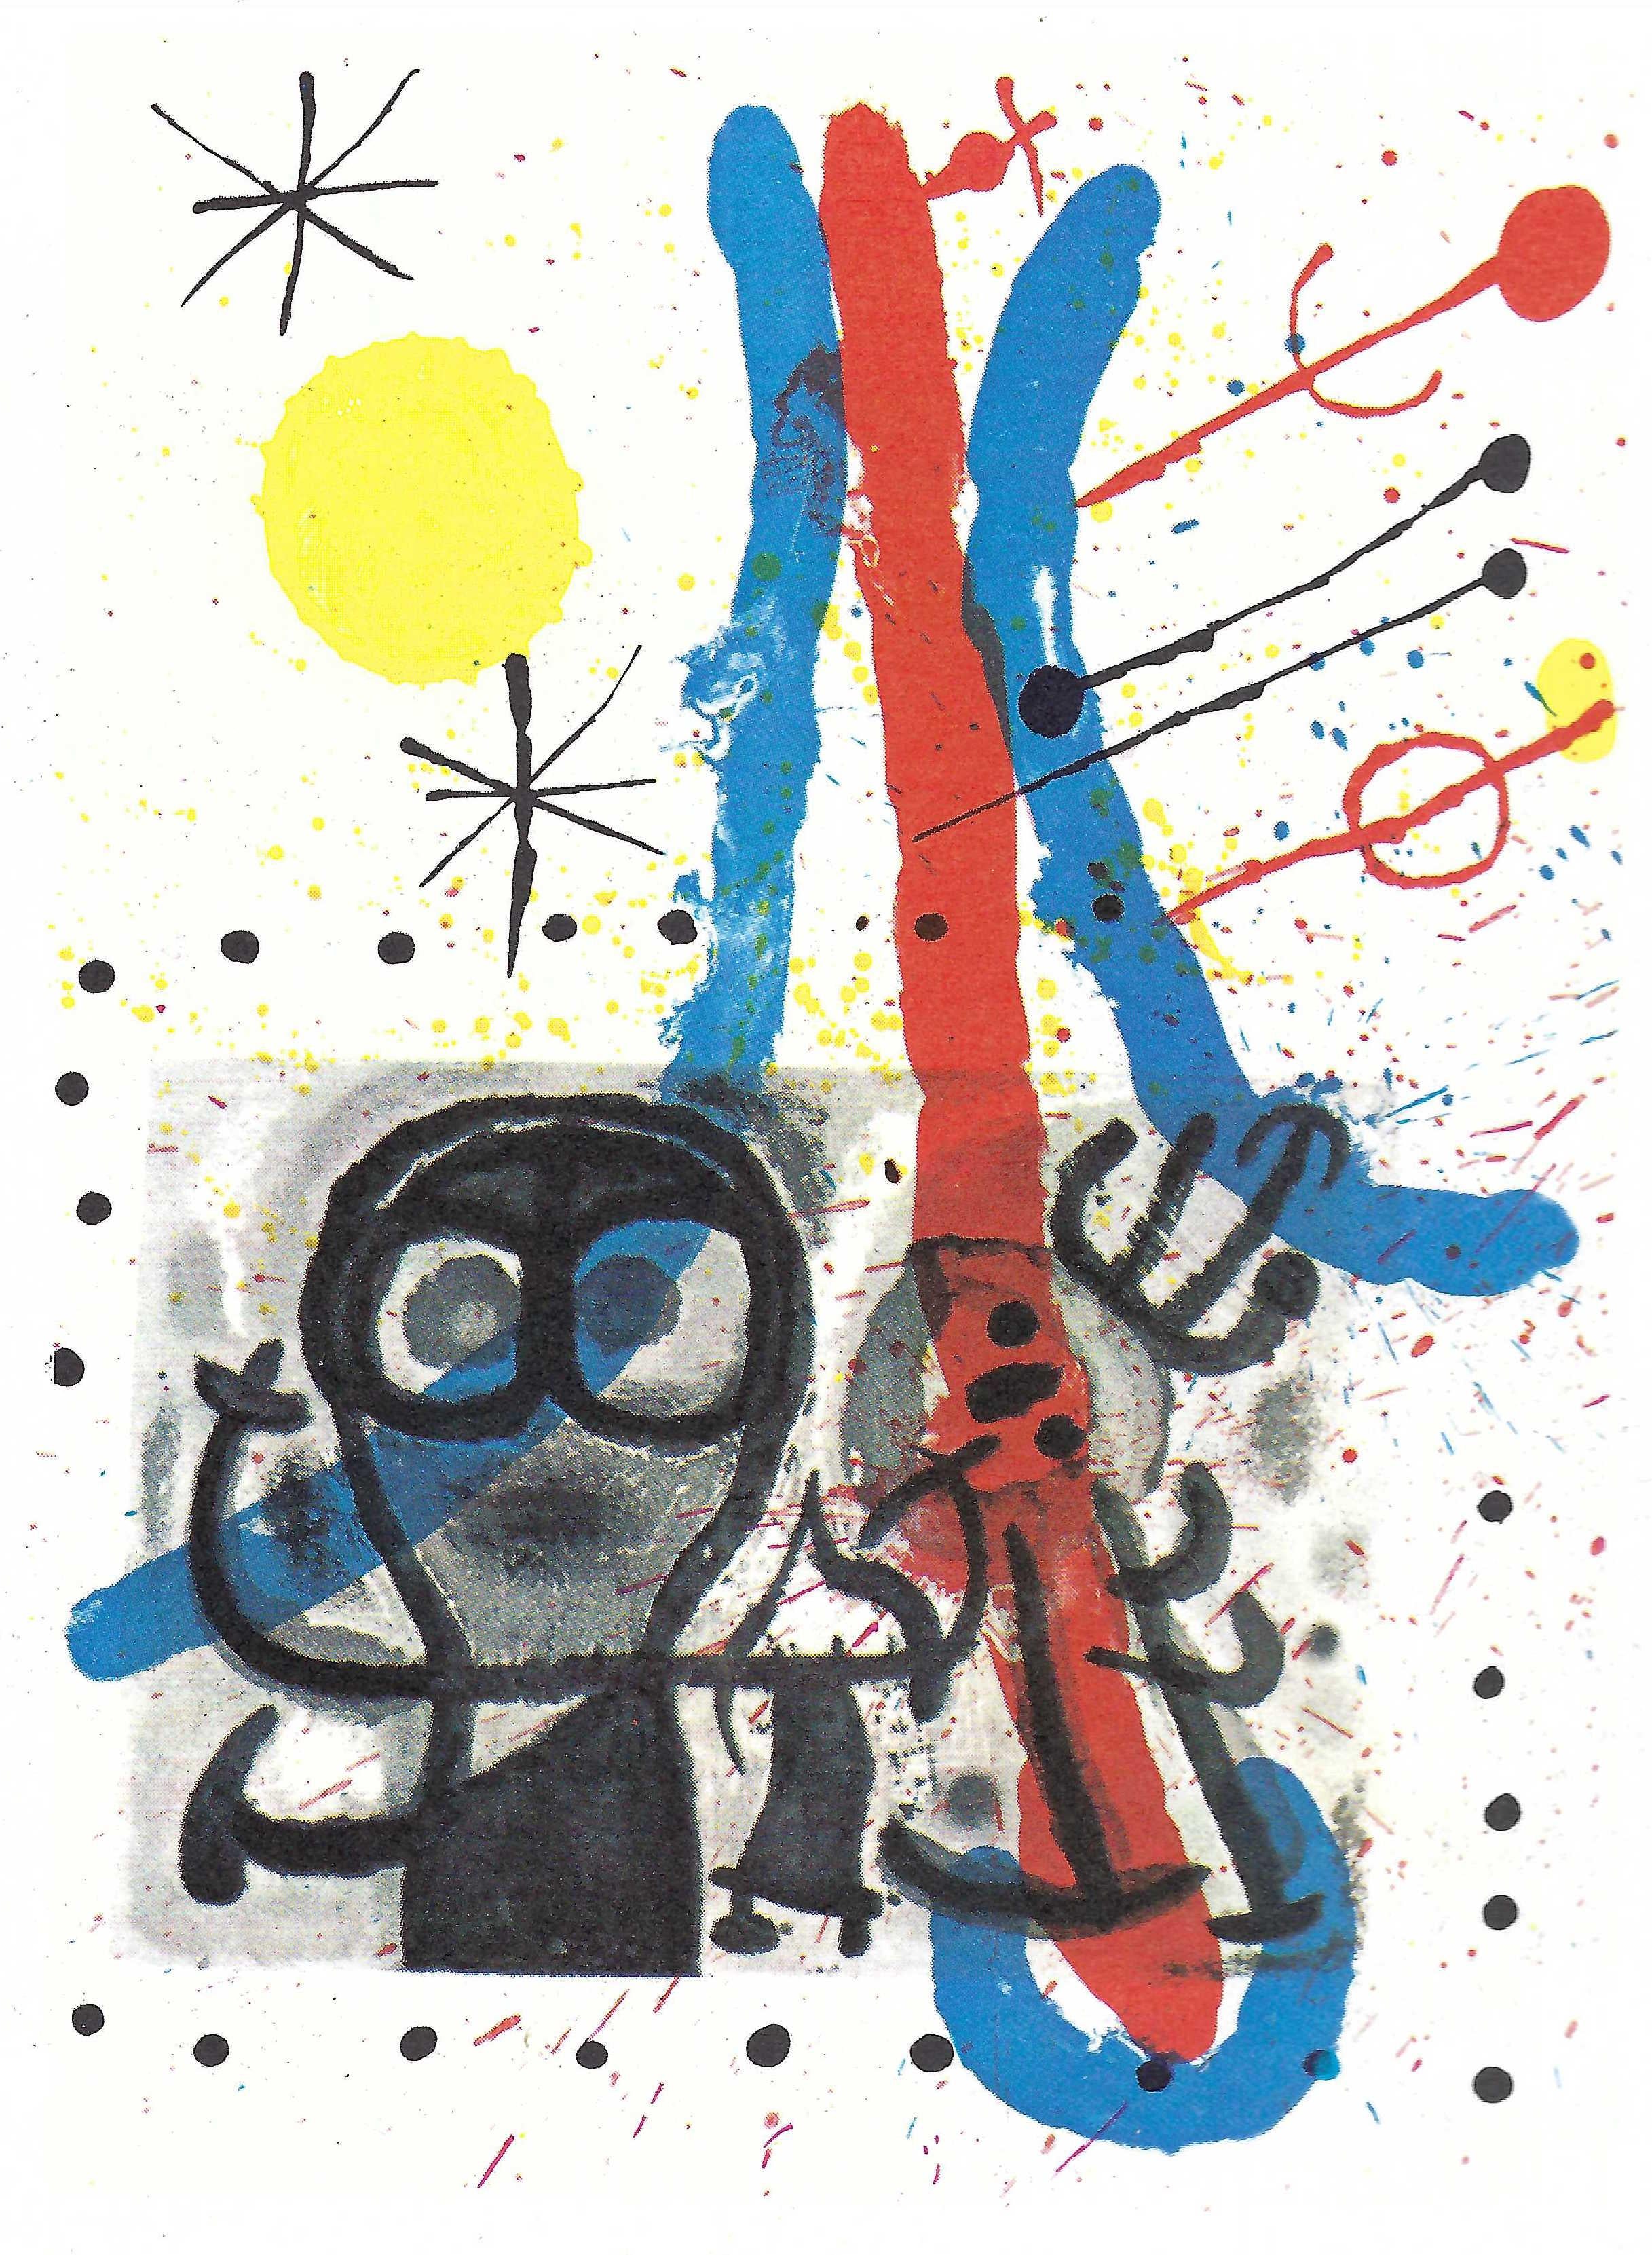 Joan Miró Abstract Print - Plate 2, from 1965 Peintures sur Cartons